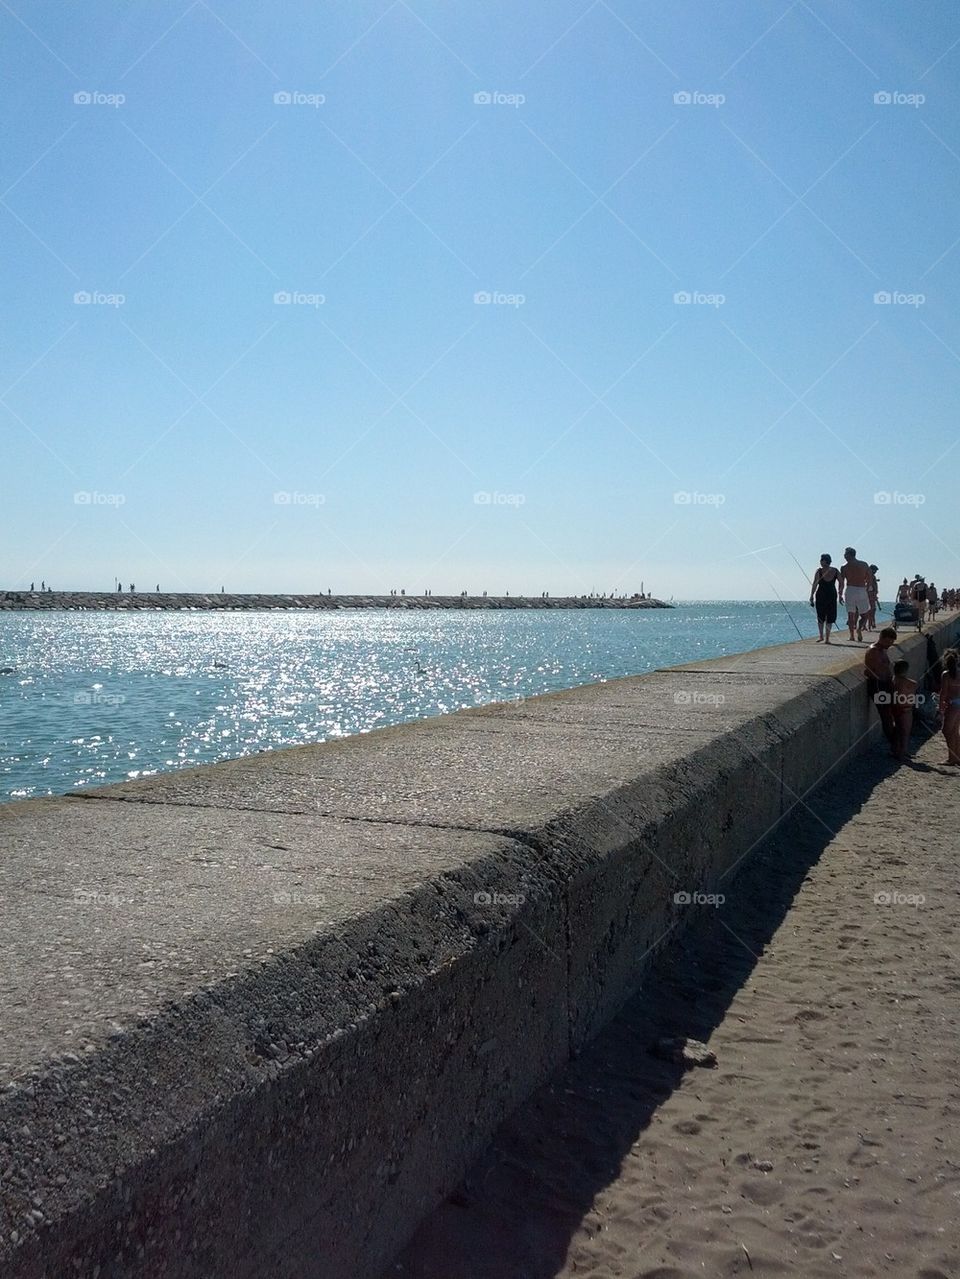 an horizon view from the seafront city of caorle venice italy